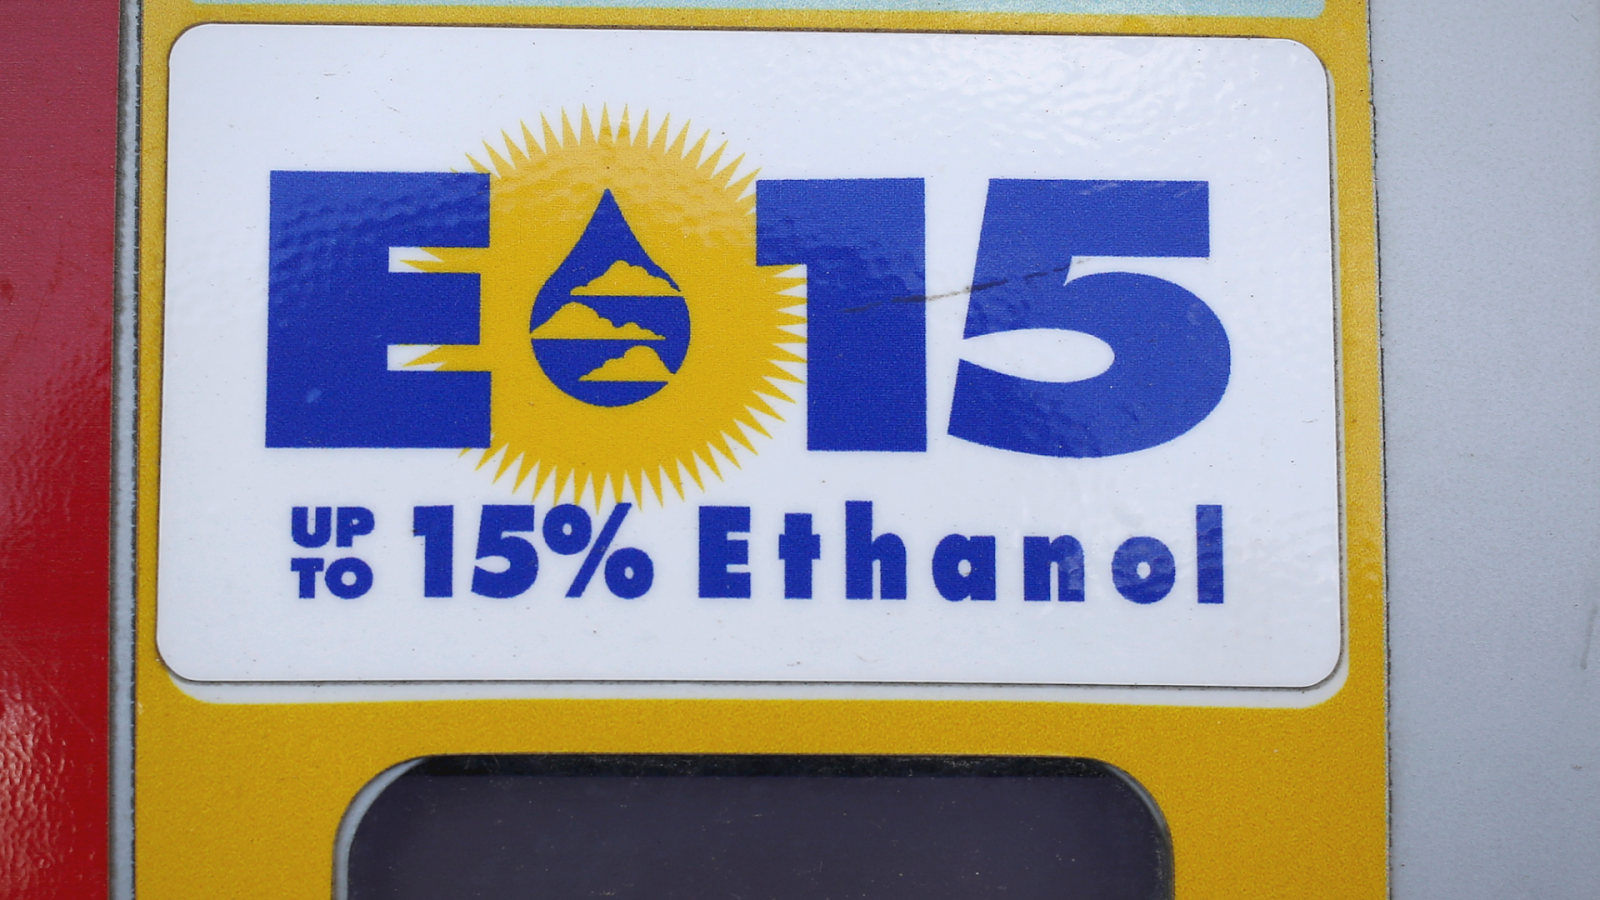 Up to 15% Ethanol Blends (E-15)